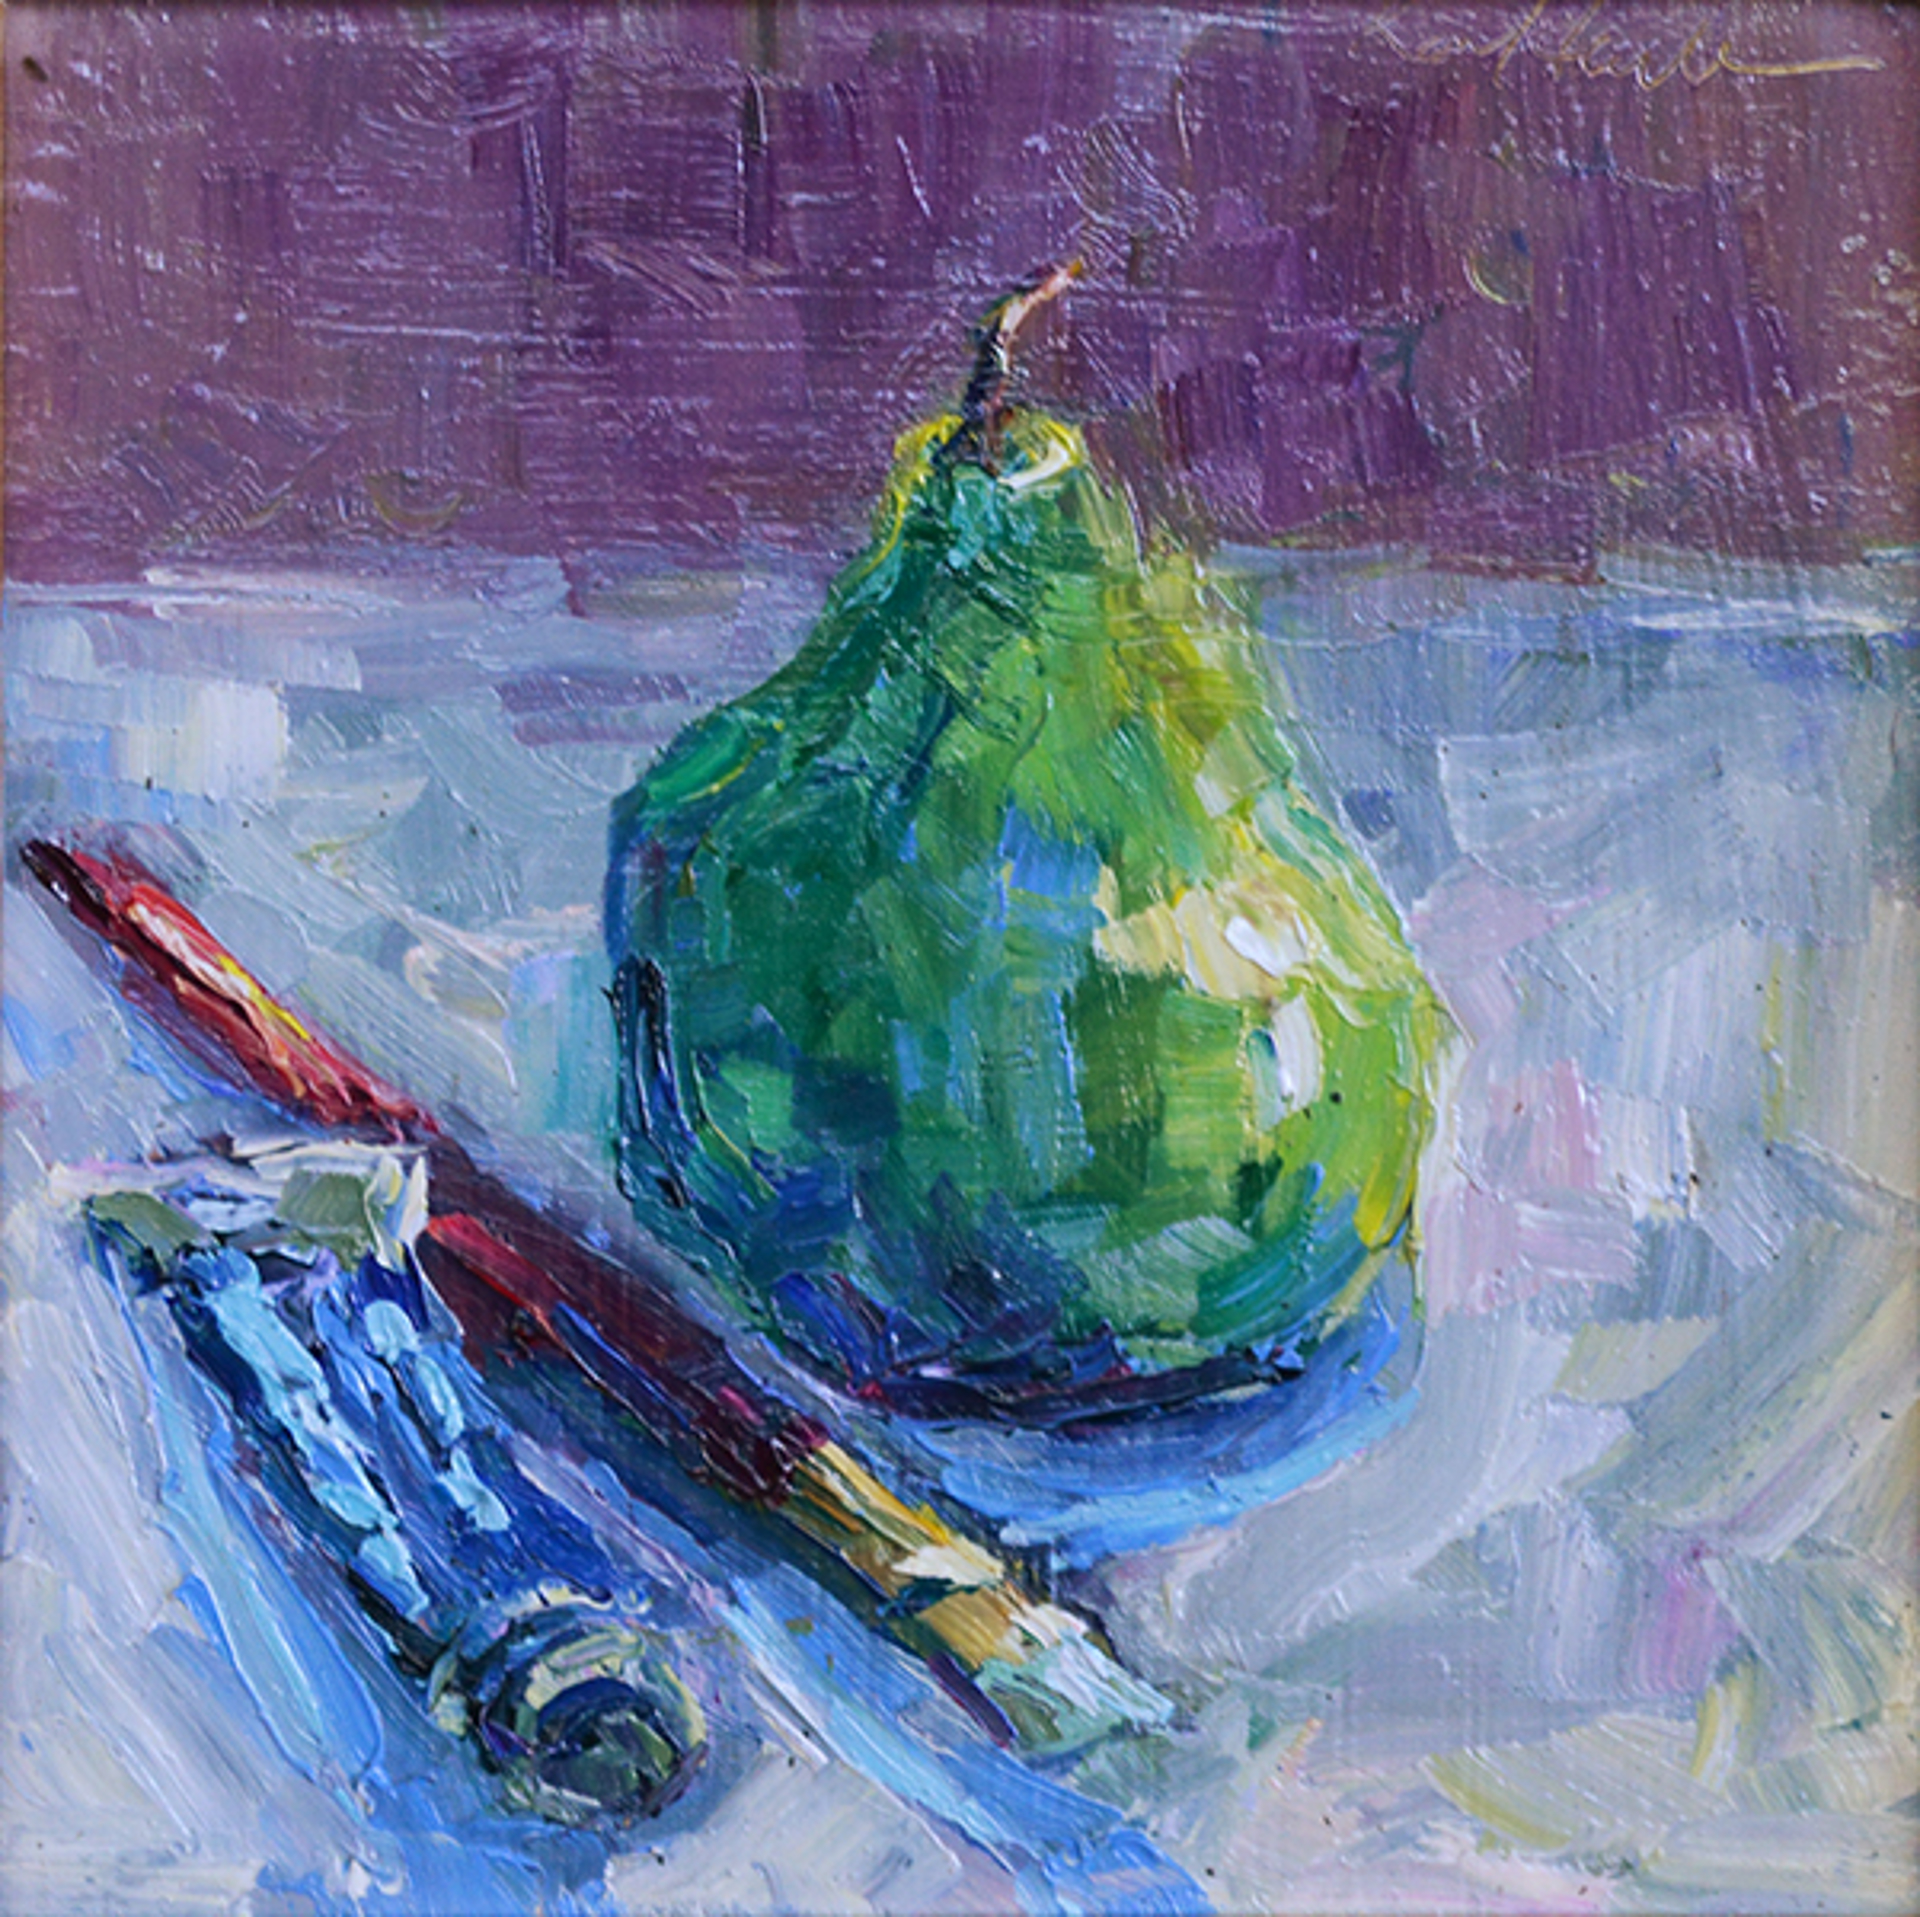 Kings Blue with Pear and Brush by Karen Hewitt Hagan